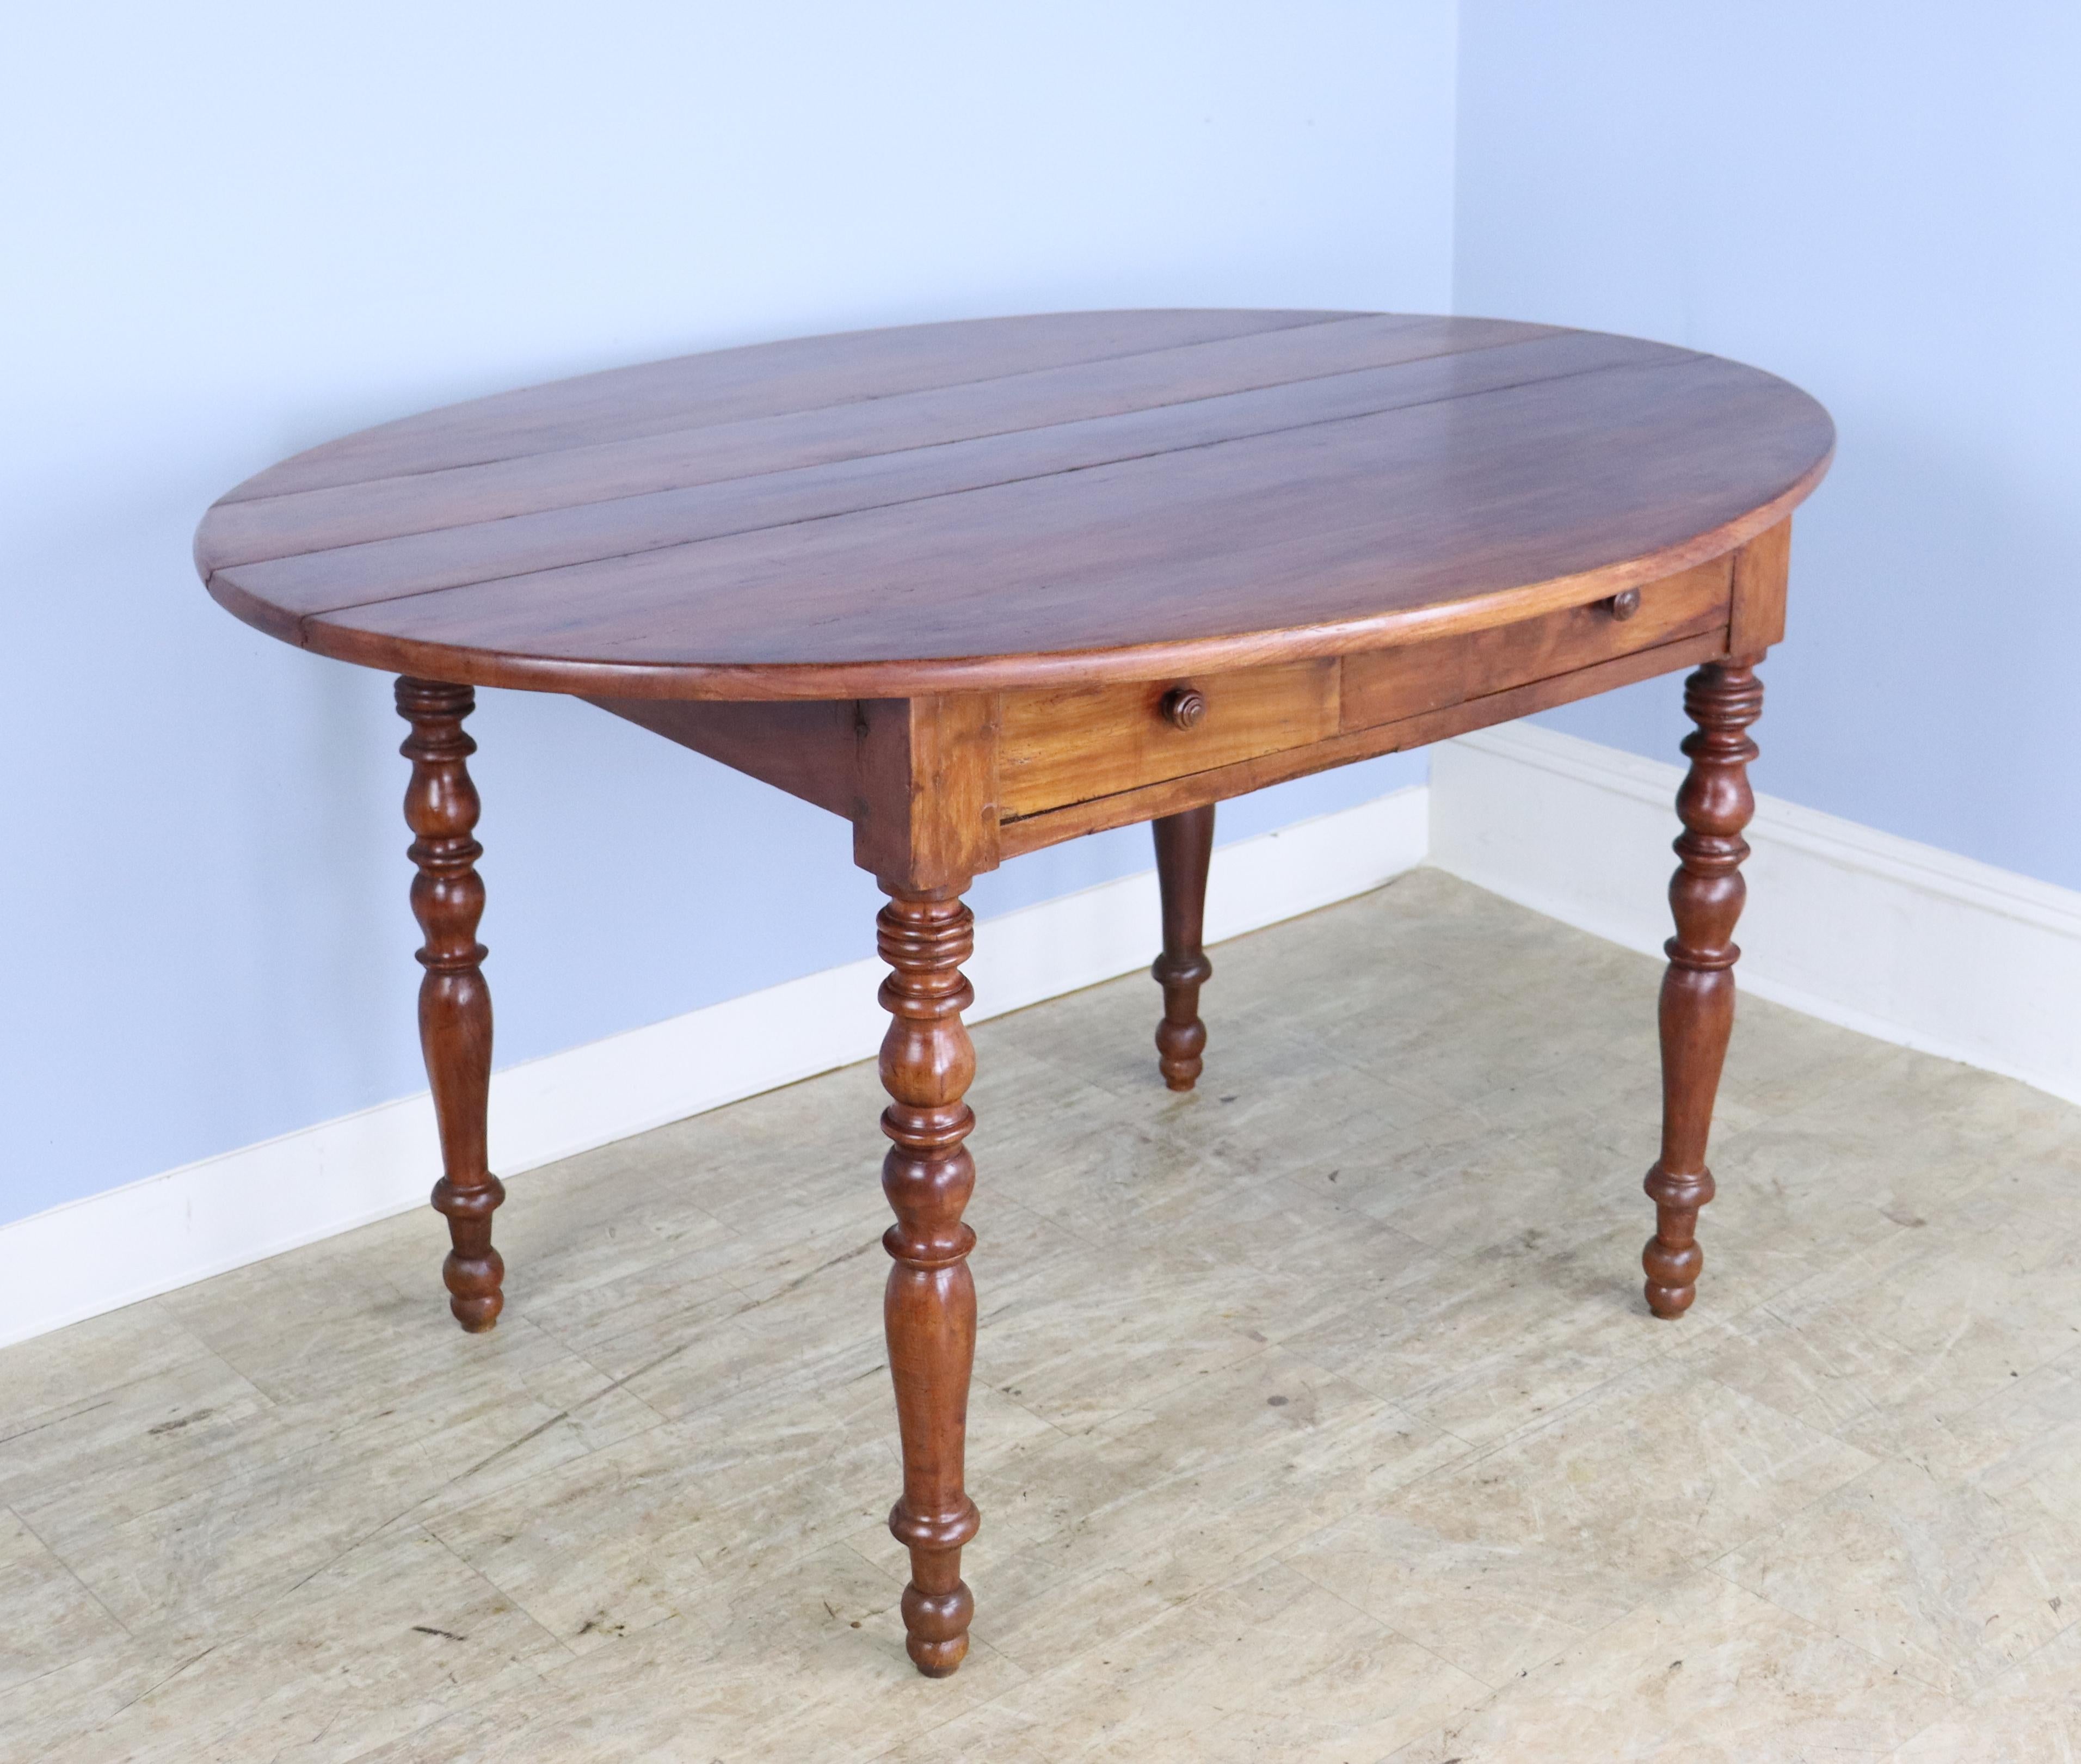 A pretty and practical oval fruitwood breakfast or occasional table with glossy turned legs. Both the top and the legs have good patina and wood grain. Two useful drawers in the apron.